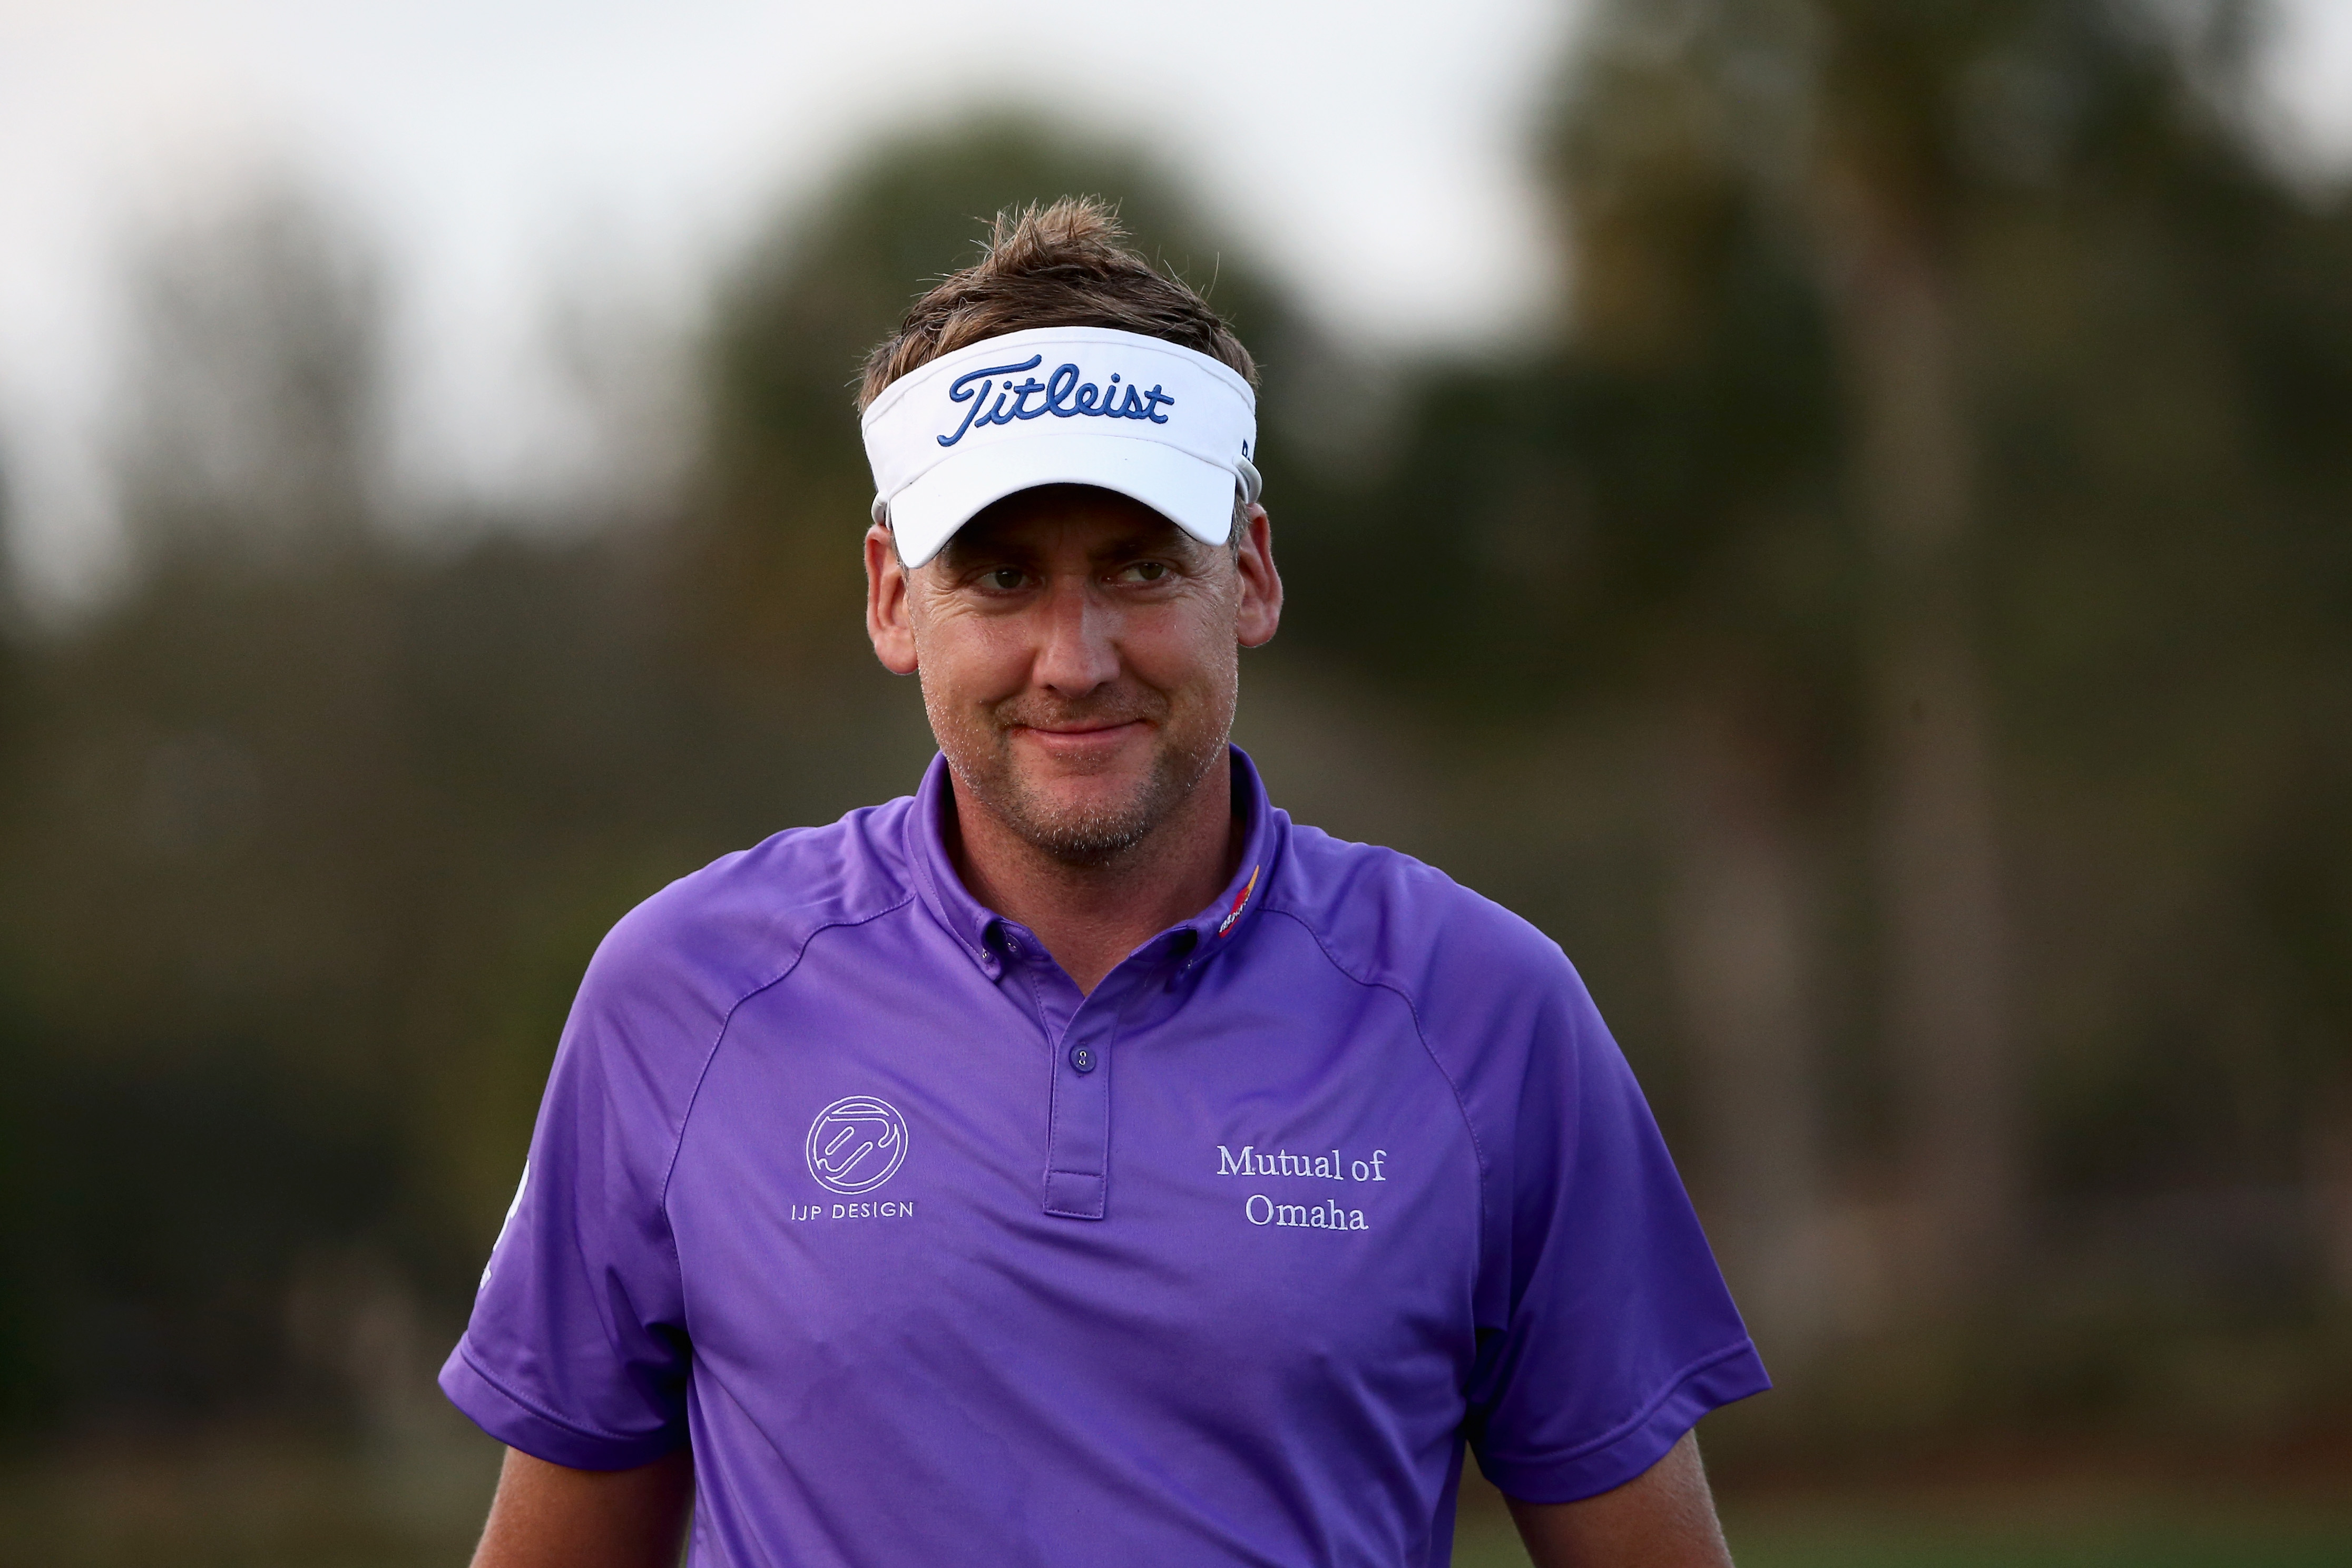 Ian Poulter went double bogey, bogey, birdie before play was suspended (Photo: Getty Images)